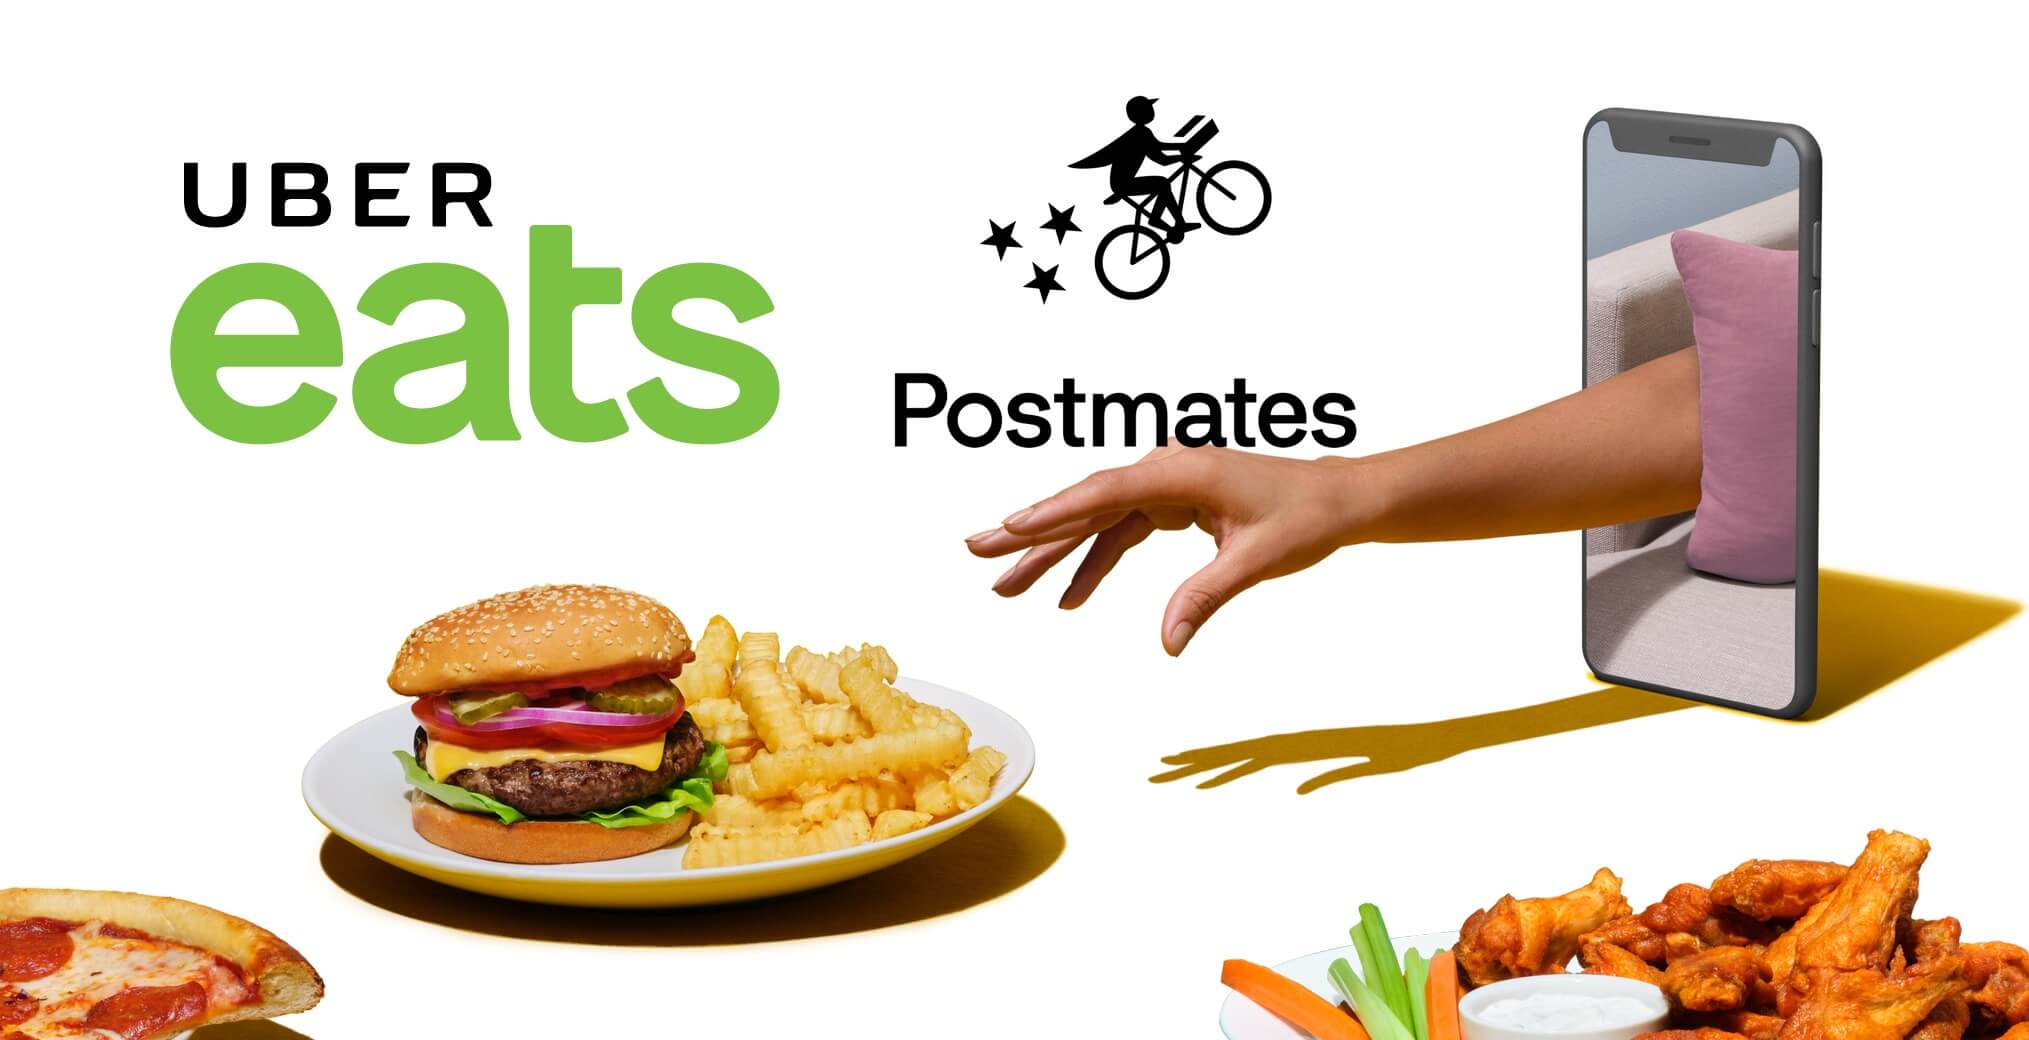 Uber reportedly offers to buy Postmates for 2.6 billion